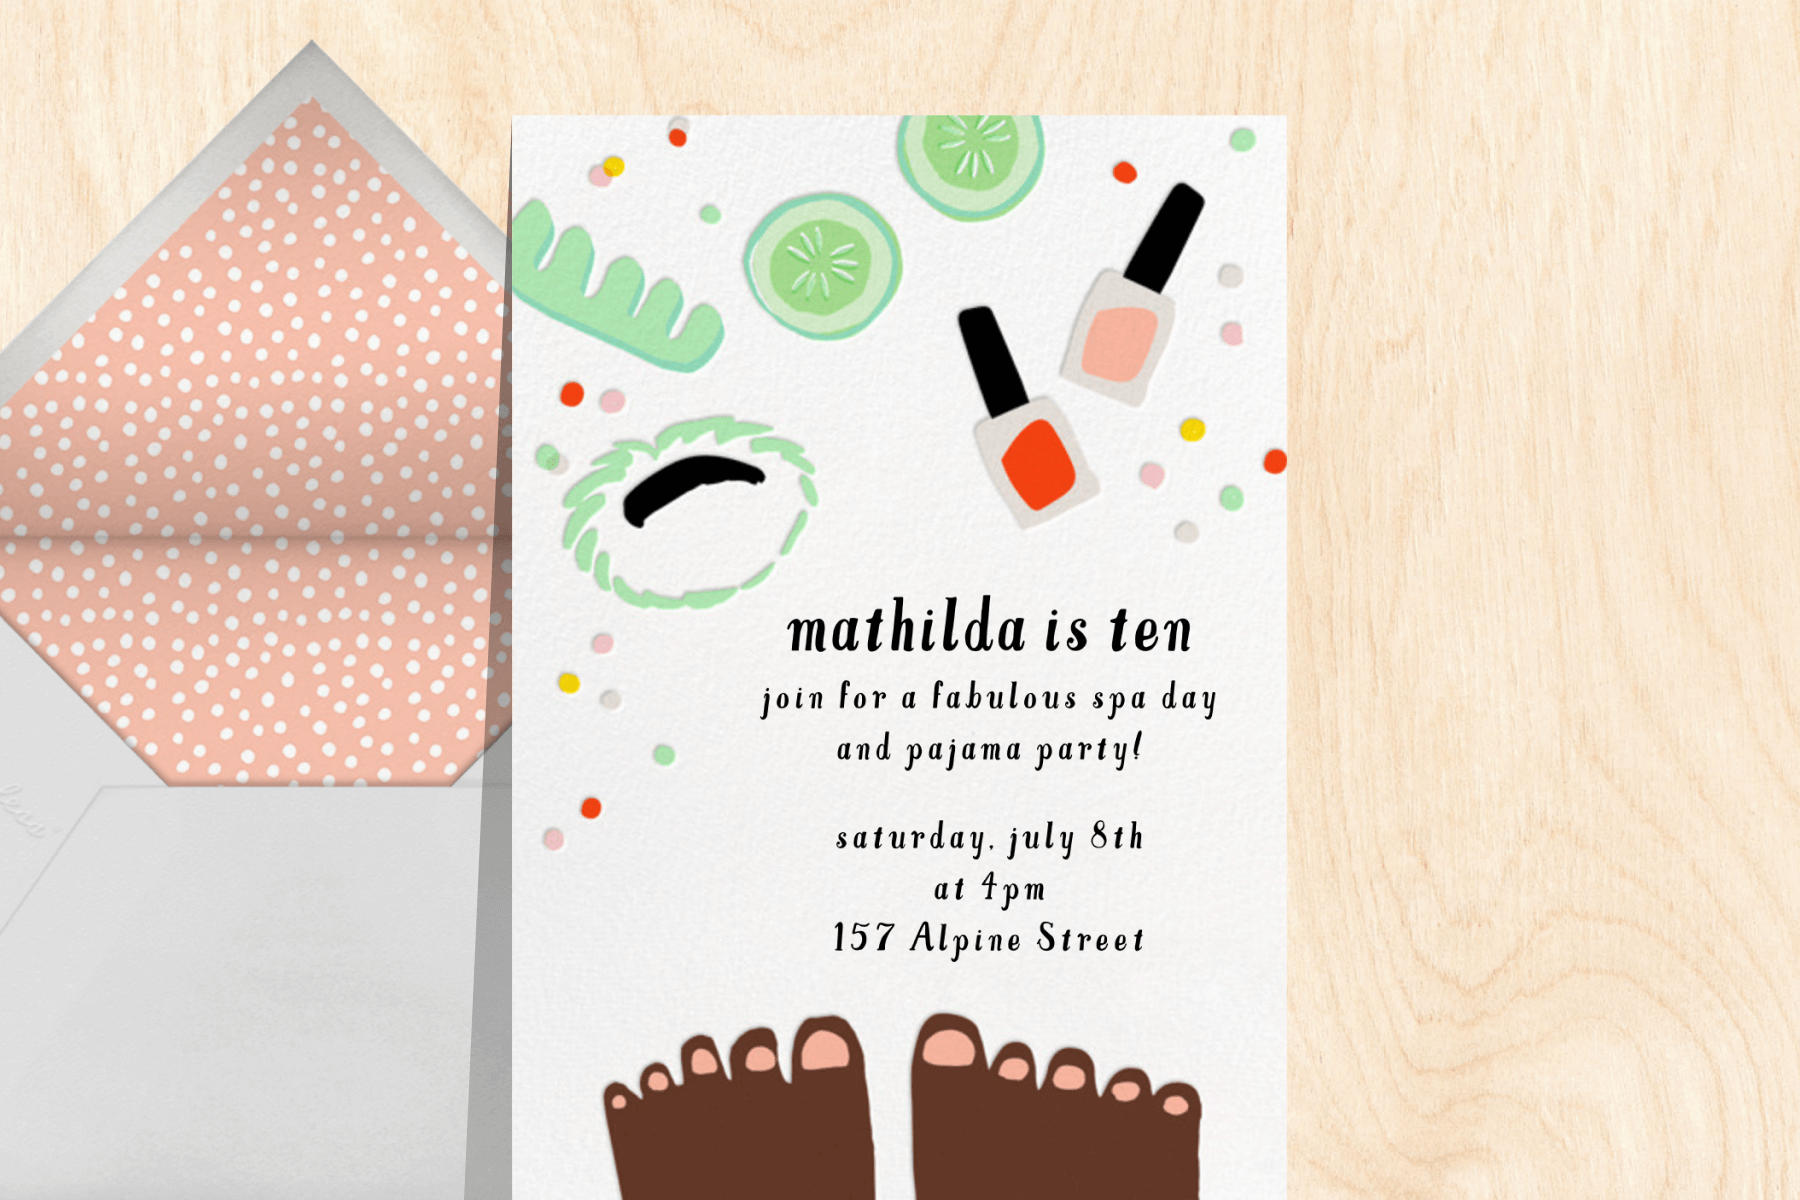 A birthday invitation featuring pampering products and painted toenails.